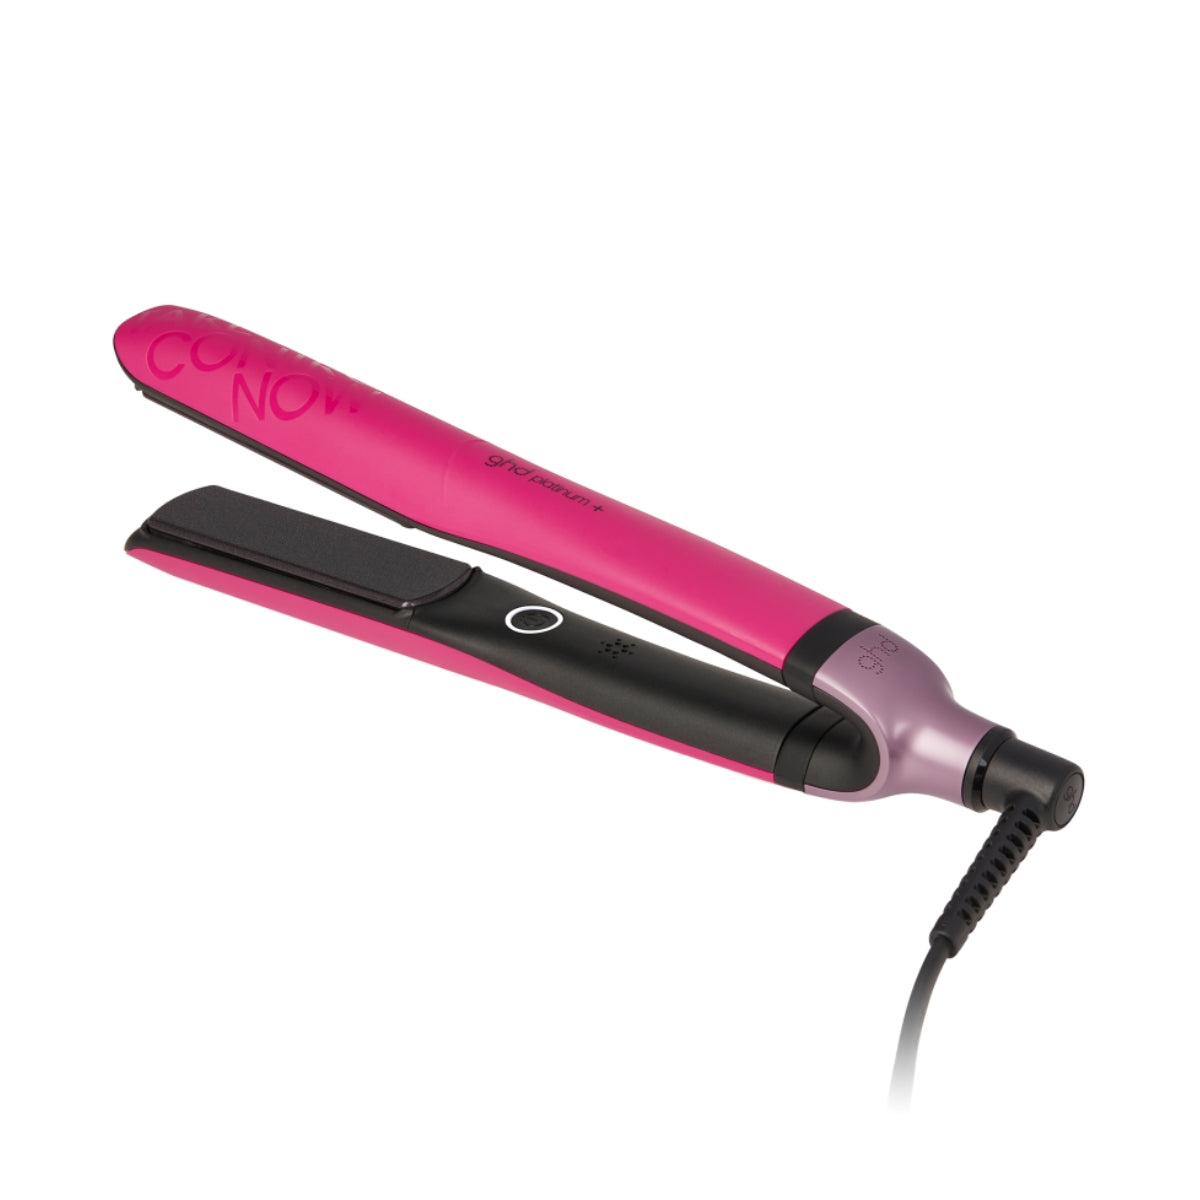 Ghd Platinum+ Limited Edition Hair Straightener in Orchid Pink